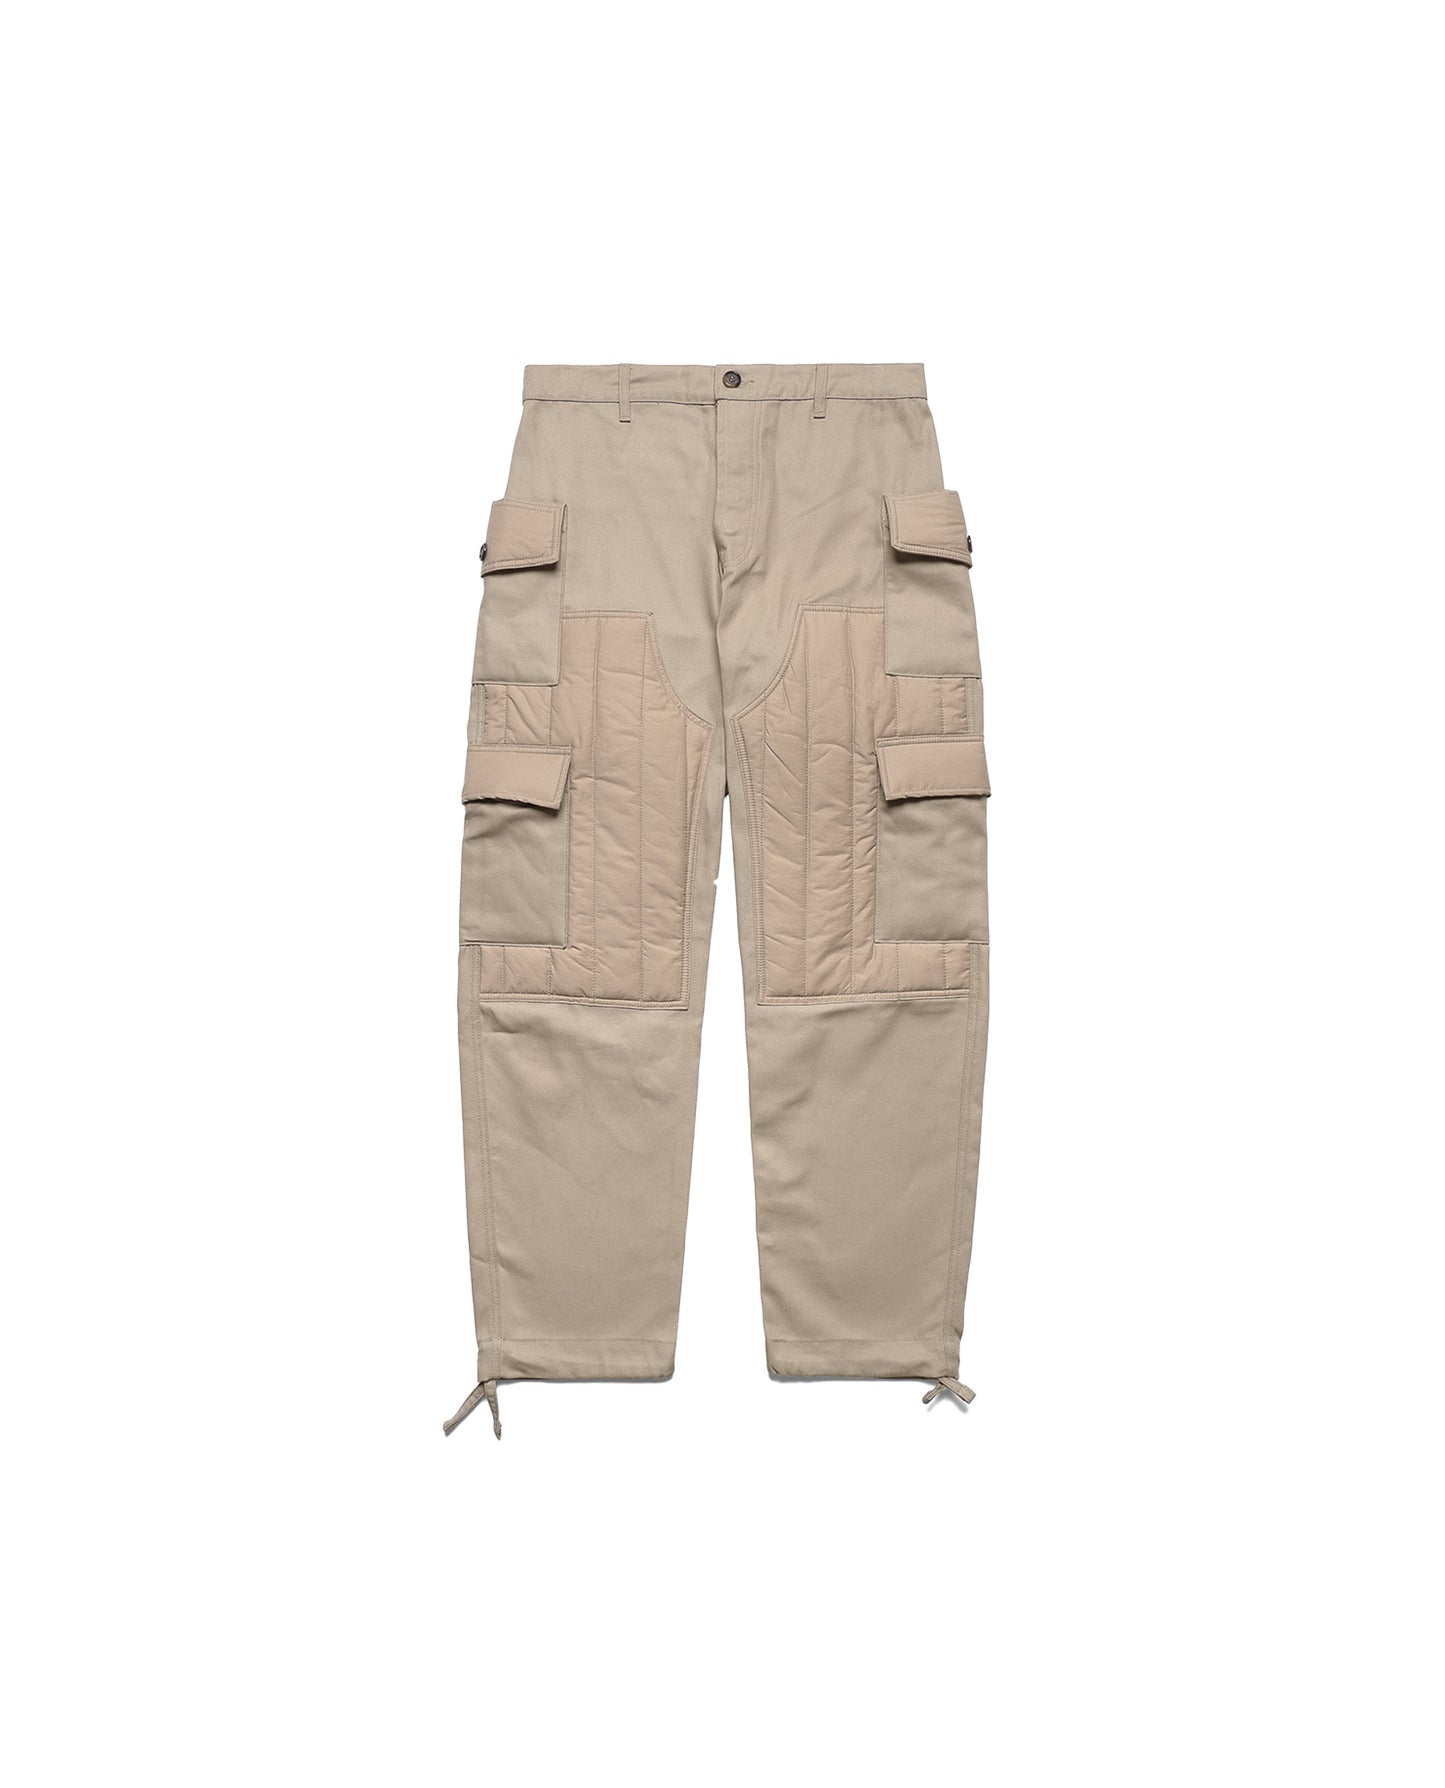 PADDED DOUBLE CARGO PANTS